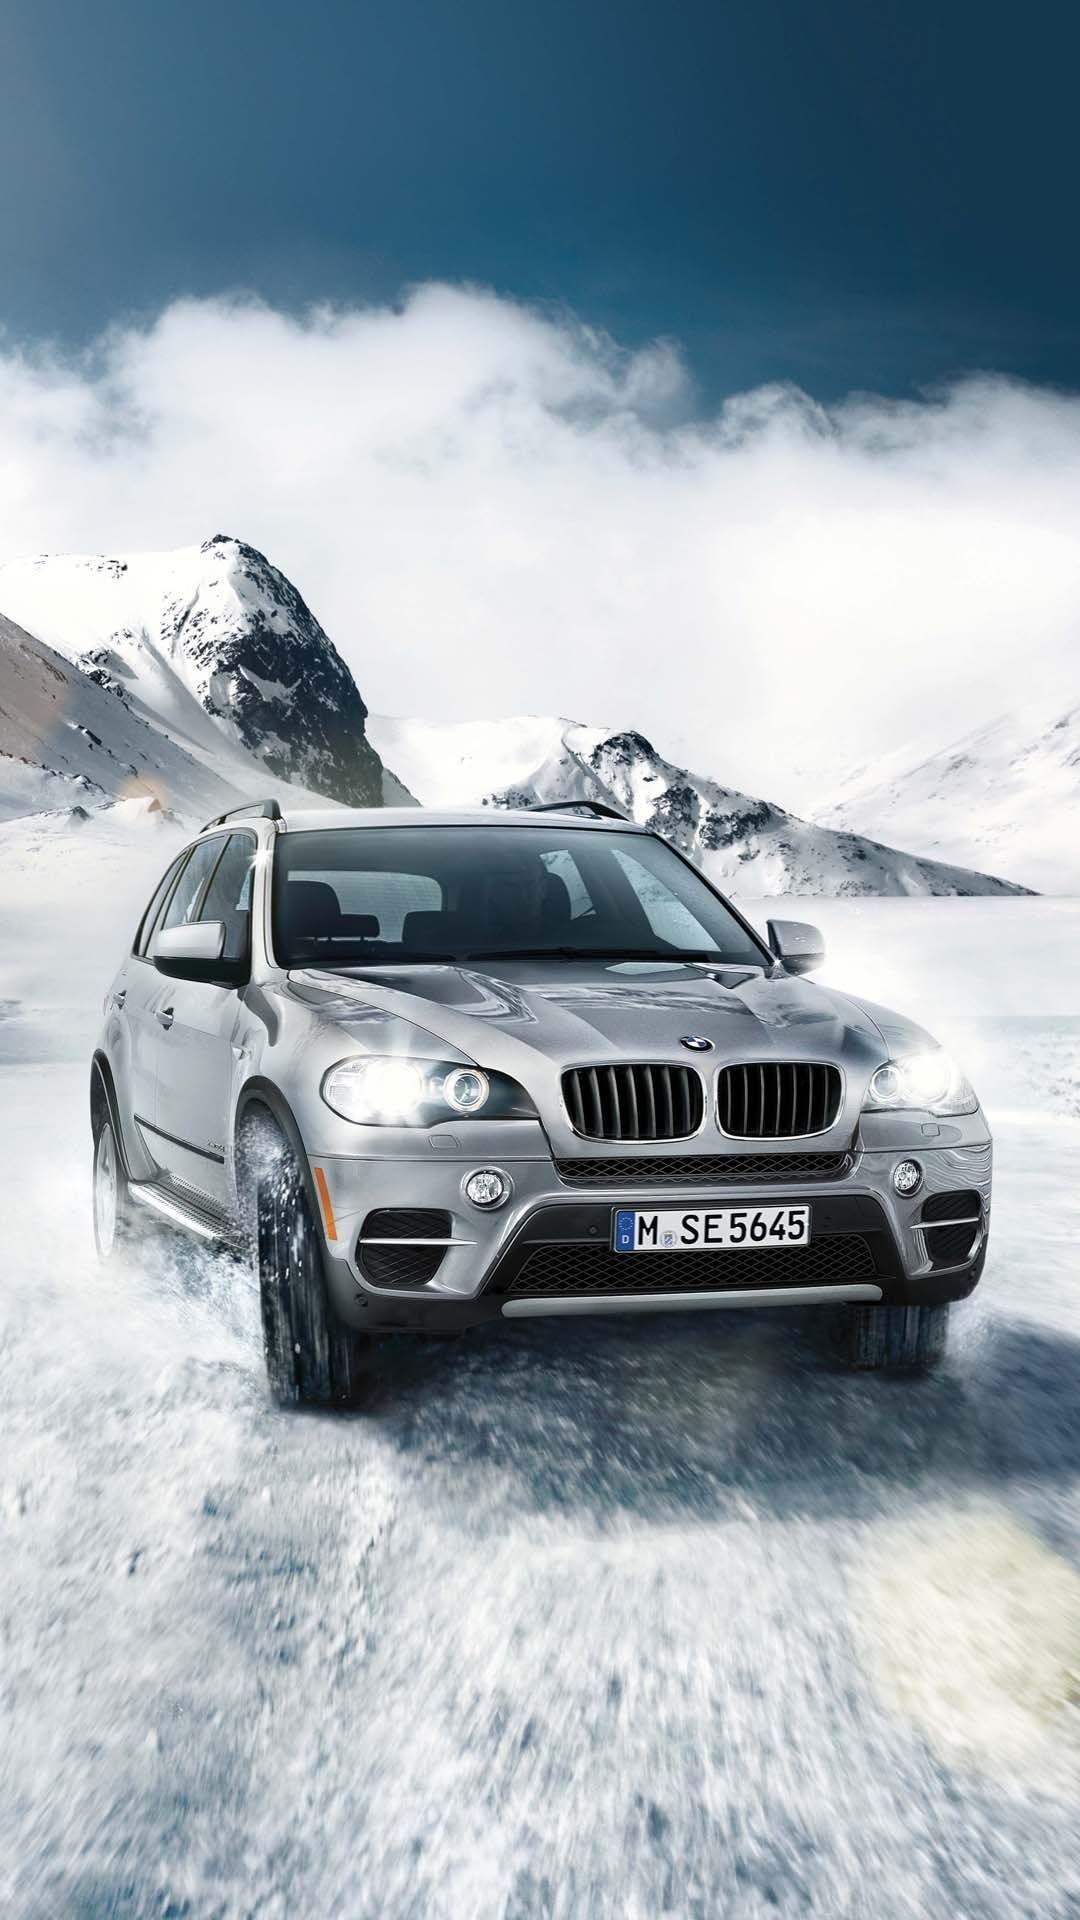 BMW X5, Pickootech's showcase, Power and elegance, Stylish crossover, 1080x1920 Full HD Handy